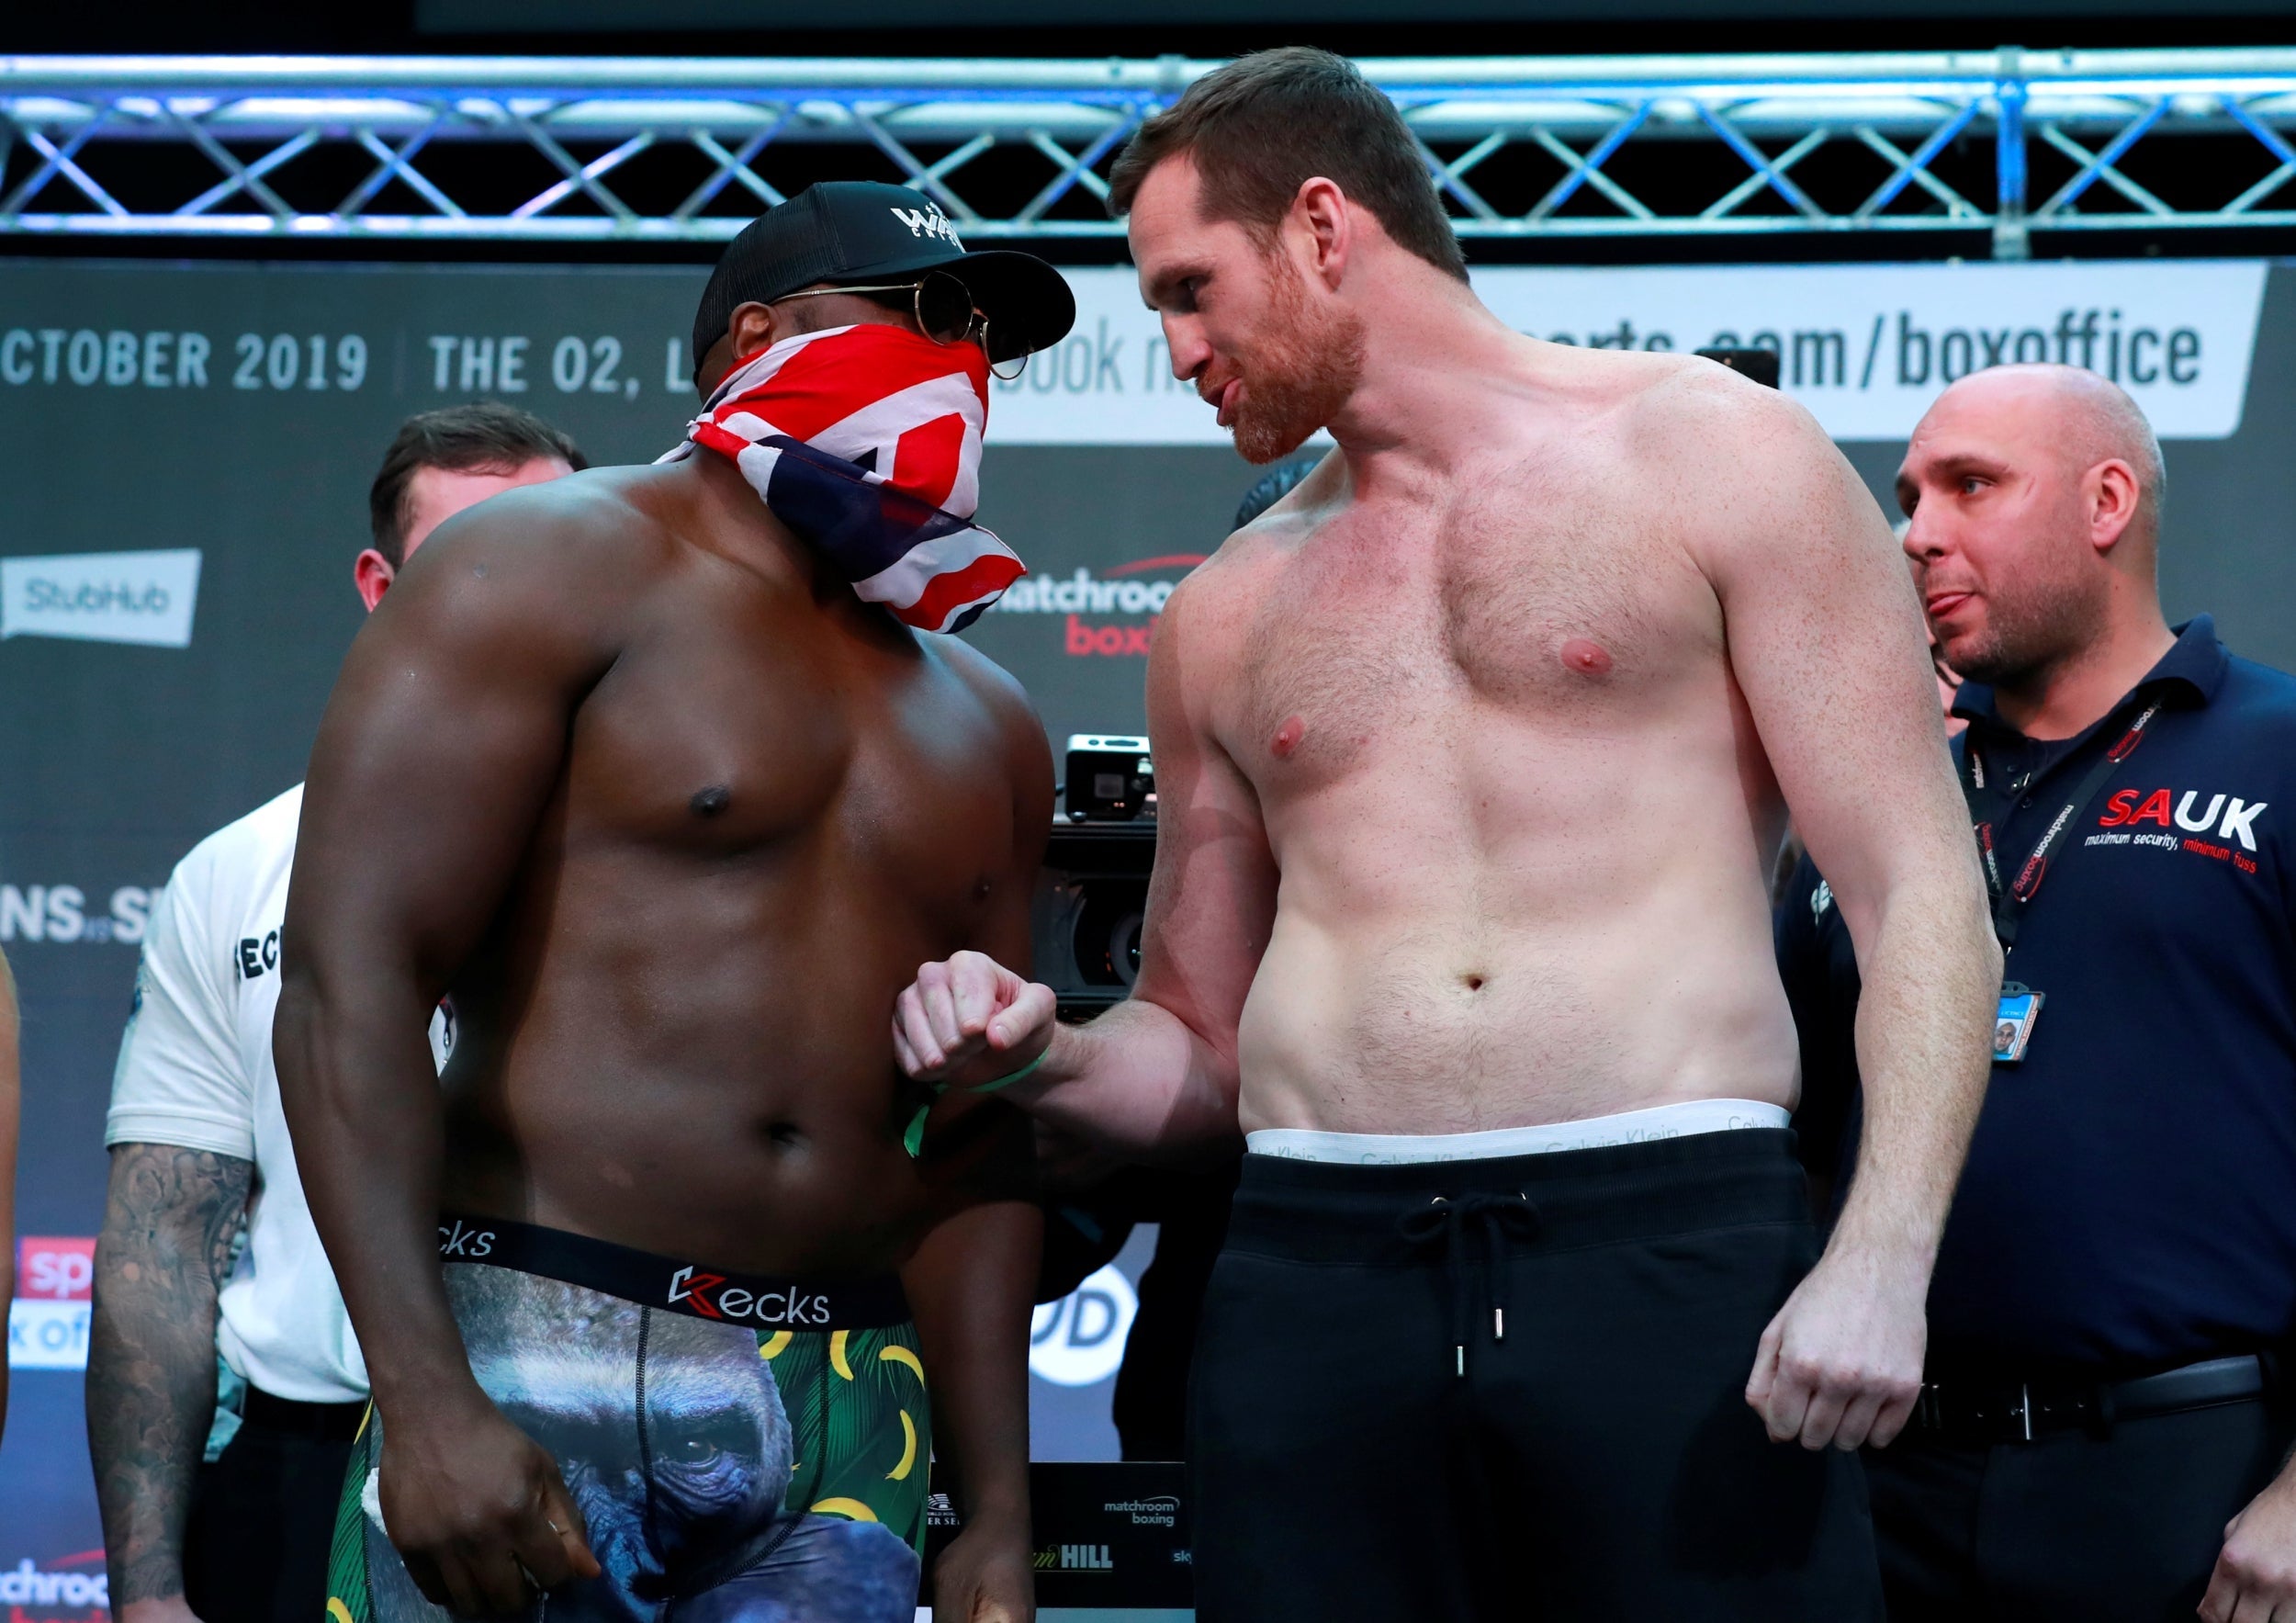 Chisora vs Price – LIVE: Stream, what time, Prograis vs Taylor WBSS final, how to watch online and latest info